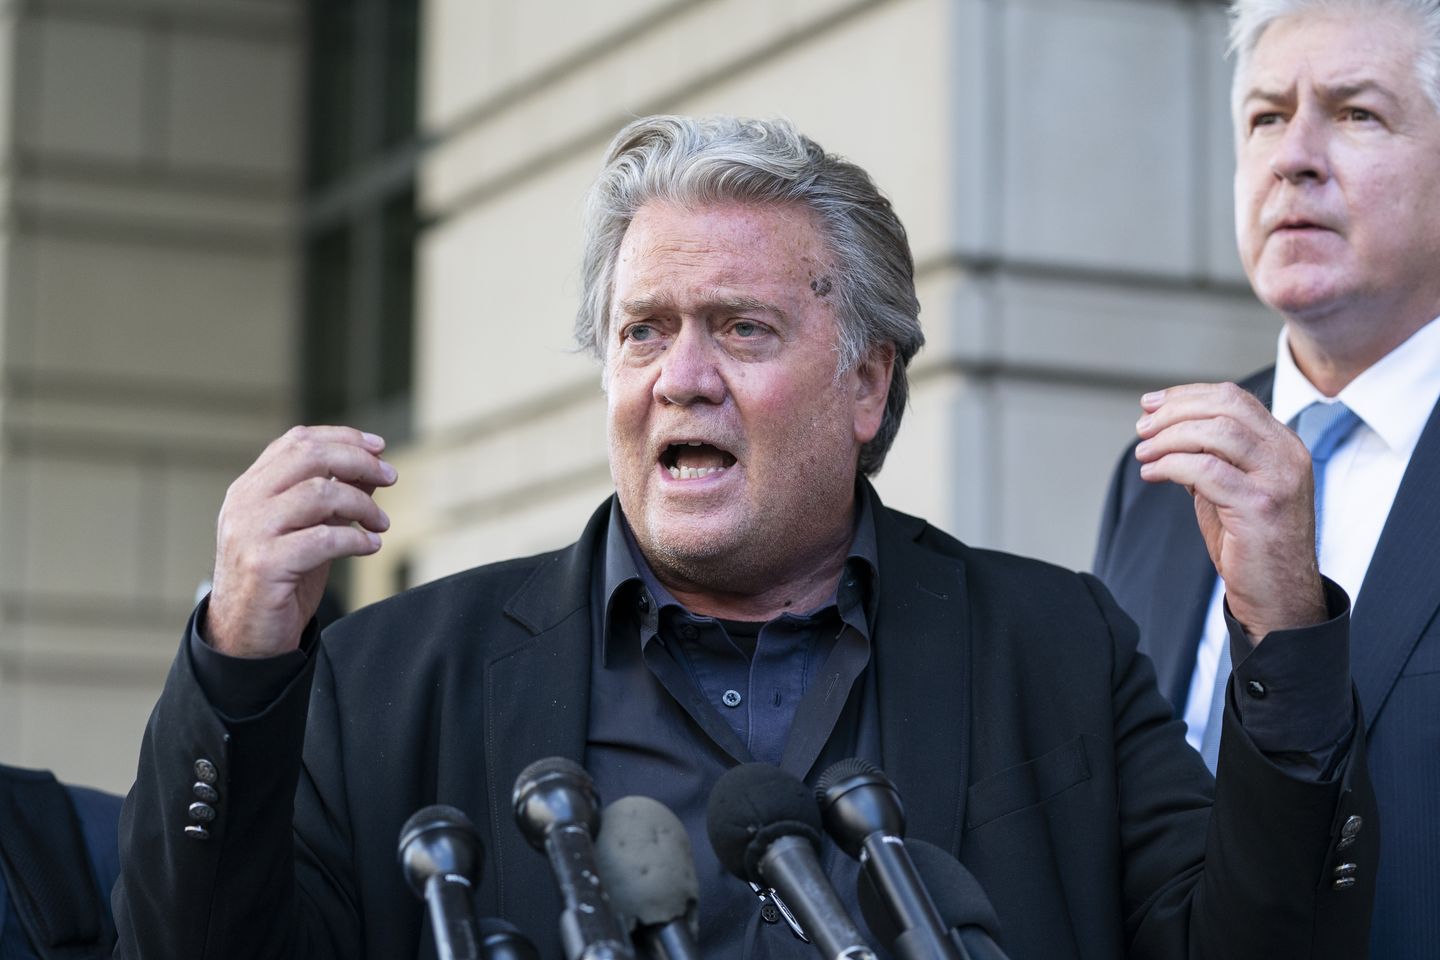 Steve Bannon rips Bennie Thomson for not showing up for contempt trial